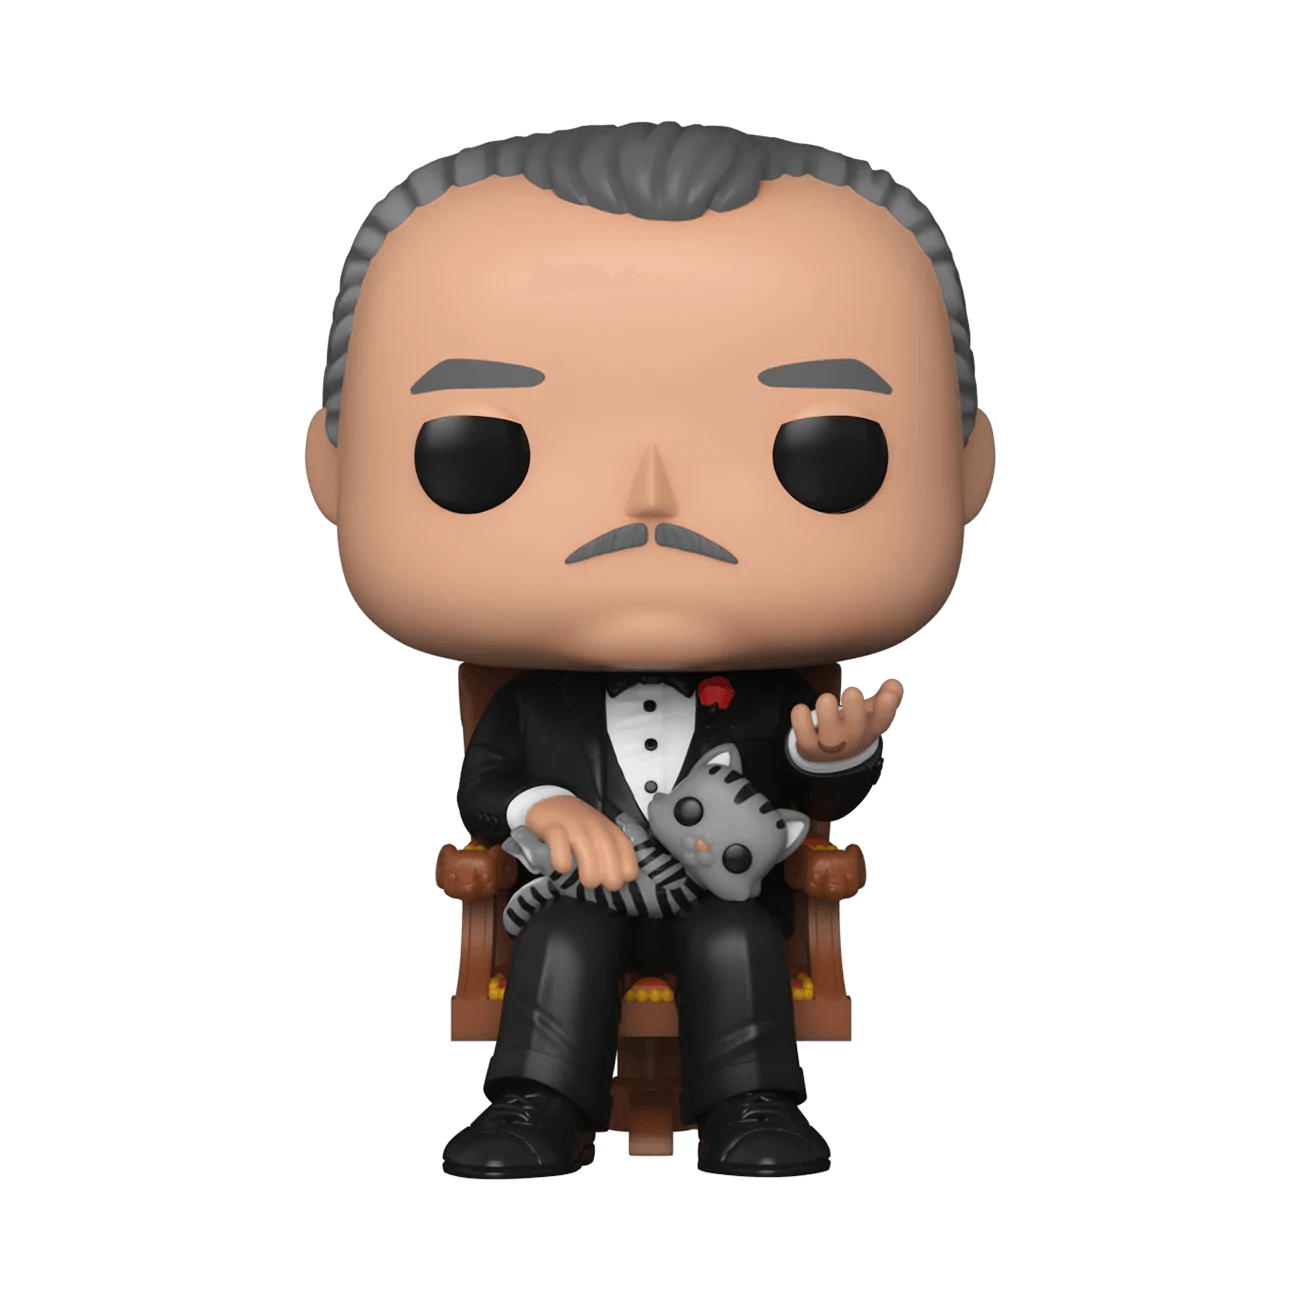 POP! Movies: The Godfather 50 Years: Vito Corleone - Todo Geek